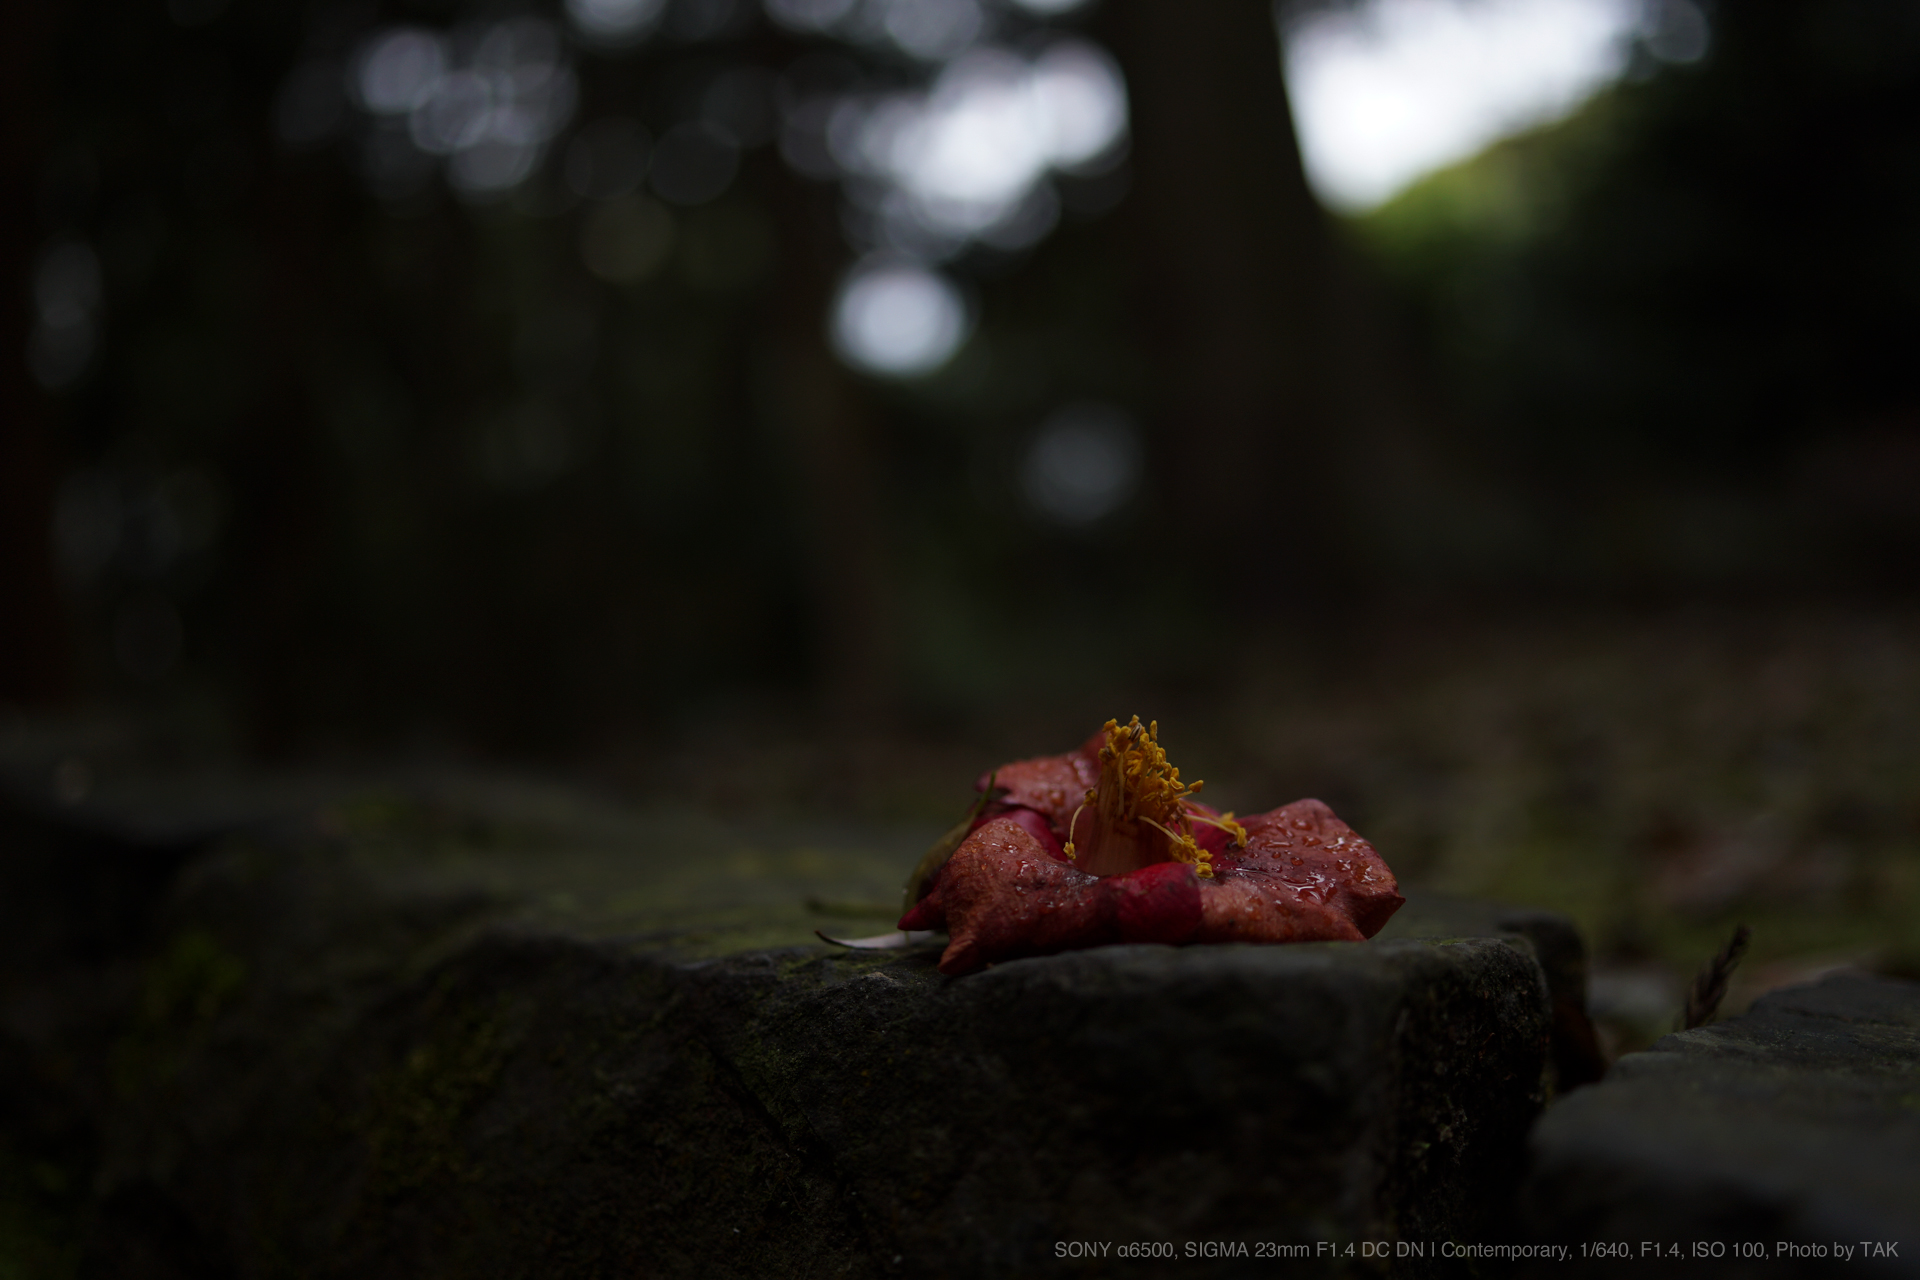 SONY α6500, SIGMA 23mm F1.4 DC DN | Contemporary, 1/640, F1.4, ISO 100, Photo by TAK 